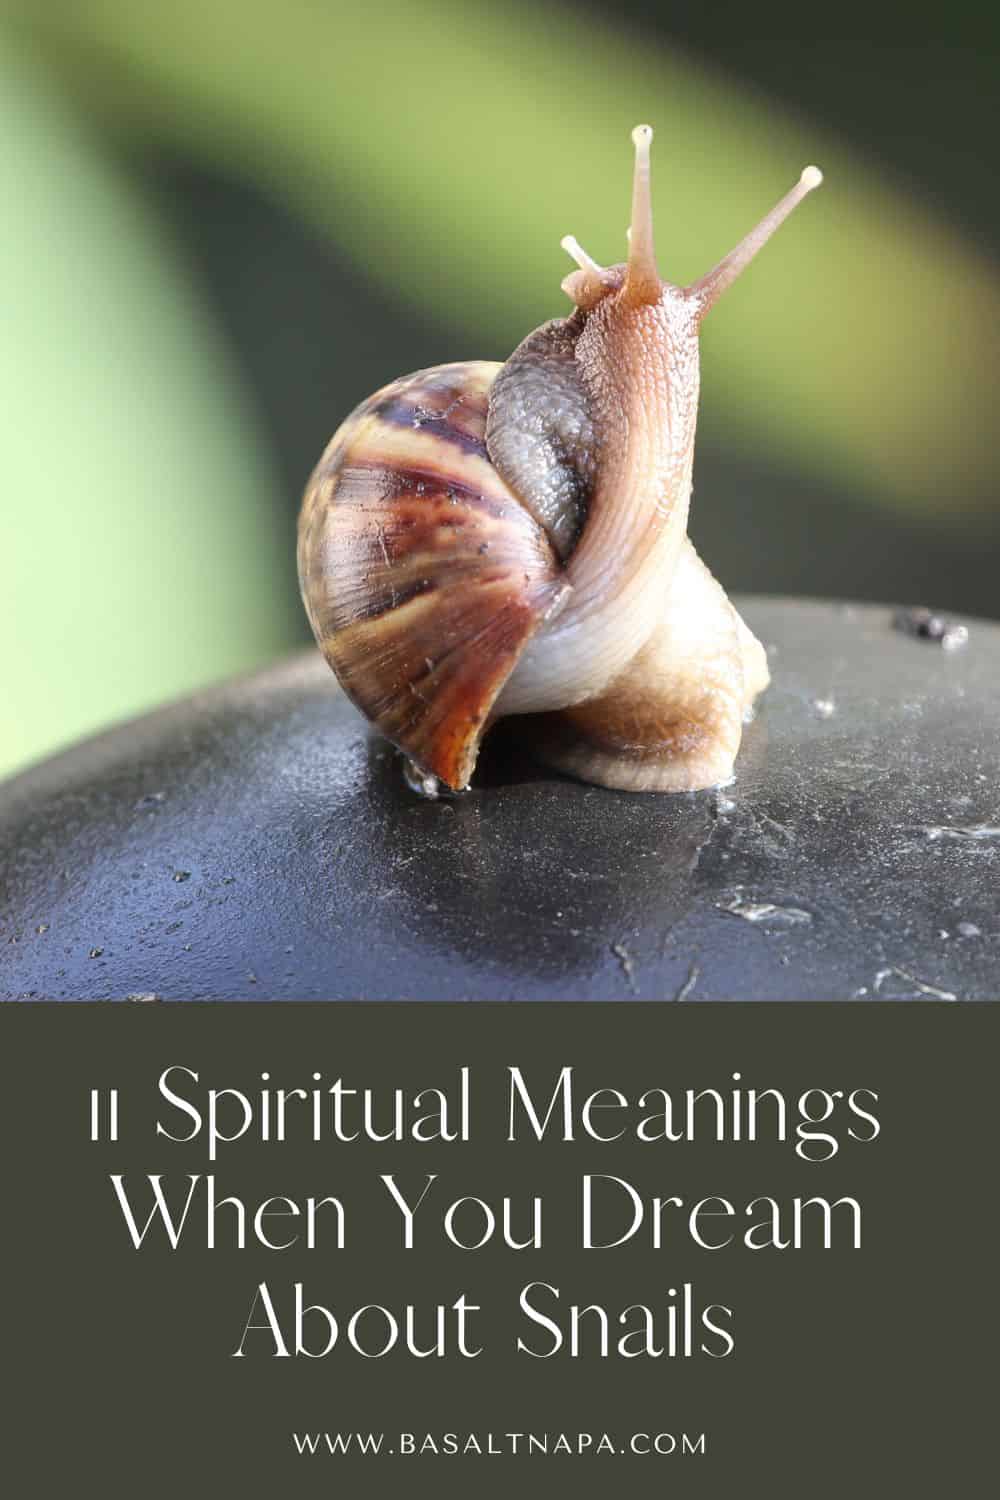 11 Spiritual Meanings When You Dream About Snails